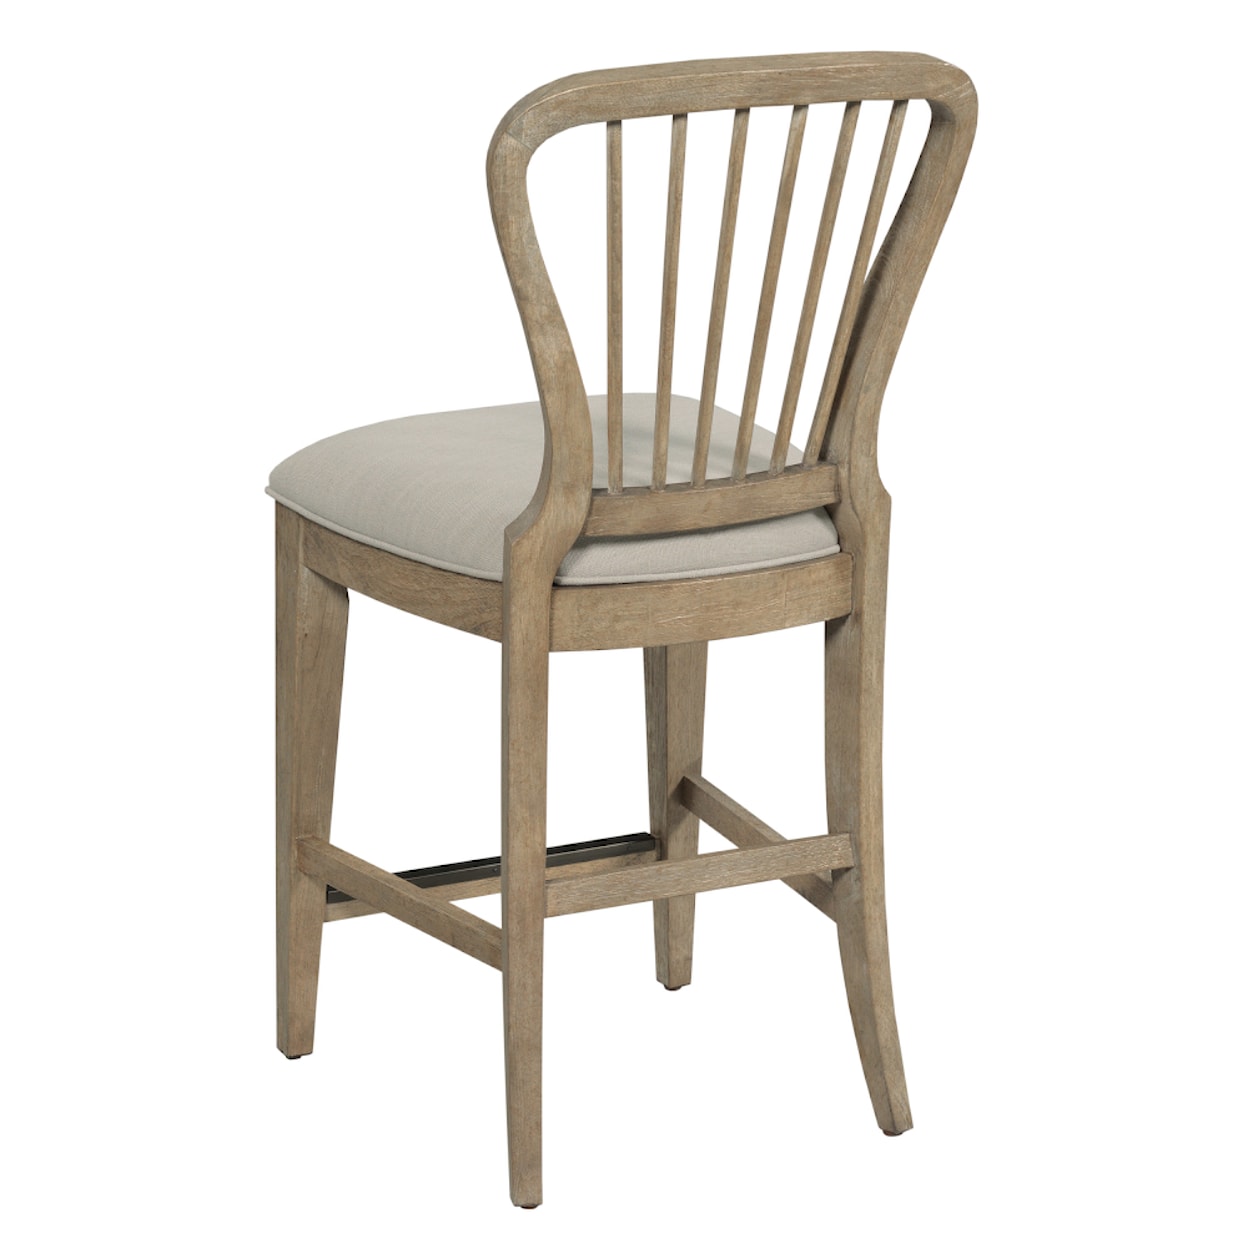 Kincaid Furniture Urban Cottage Larksville Counter Height Spindle Back Chair